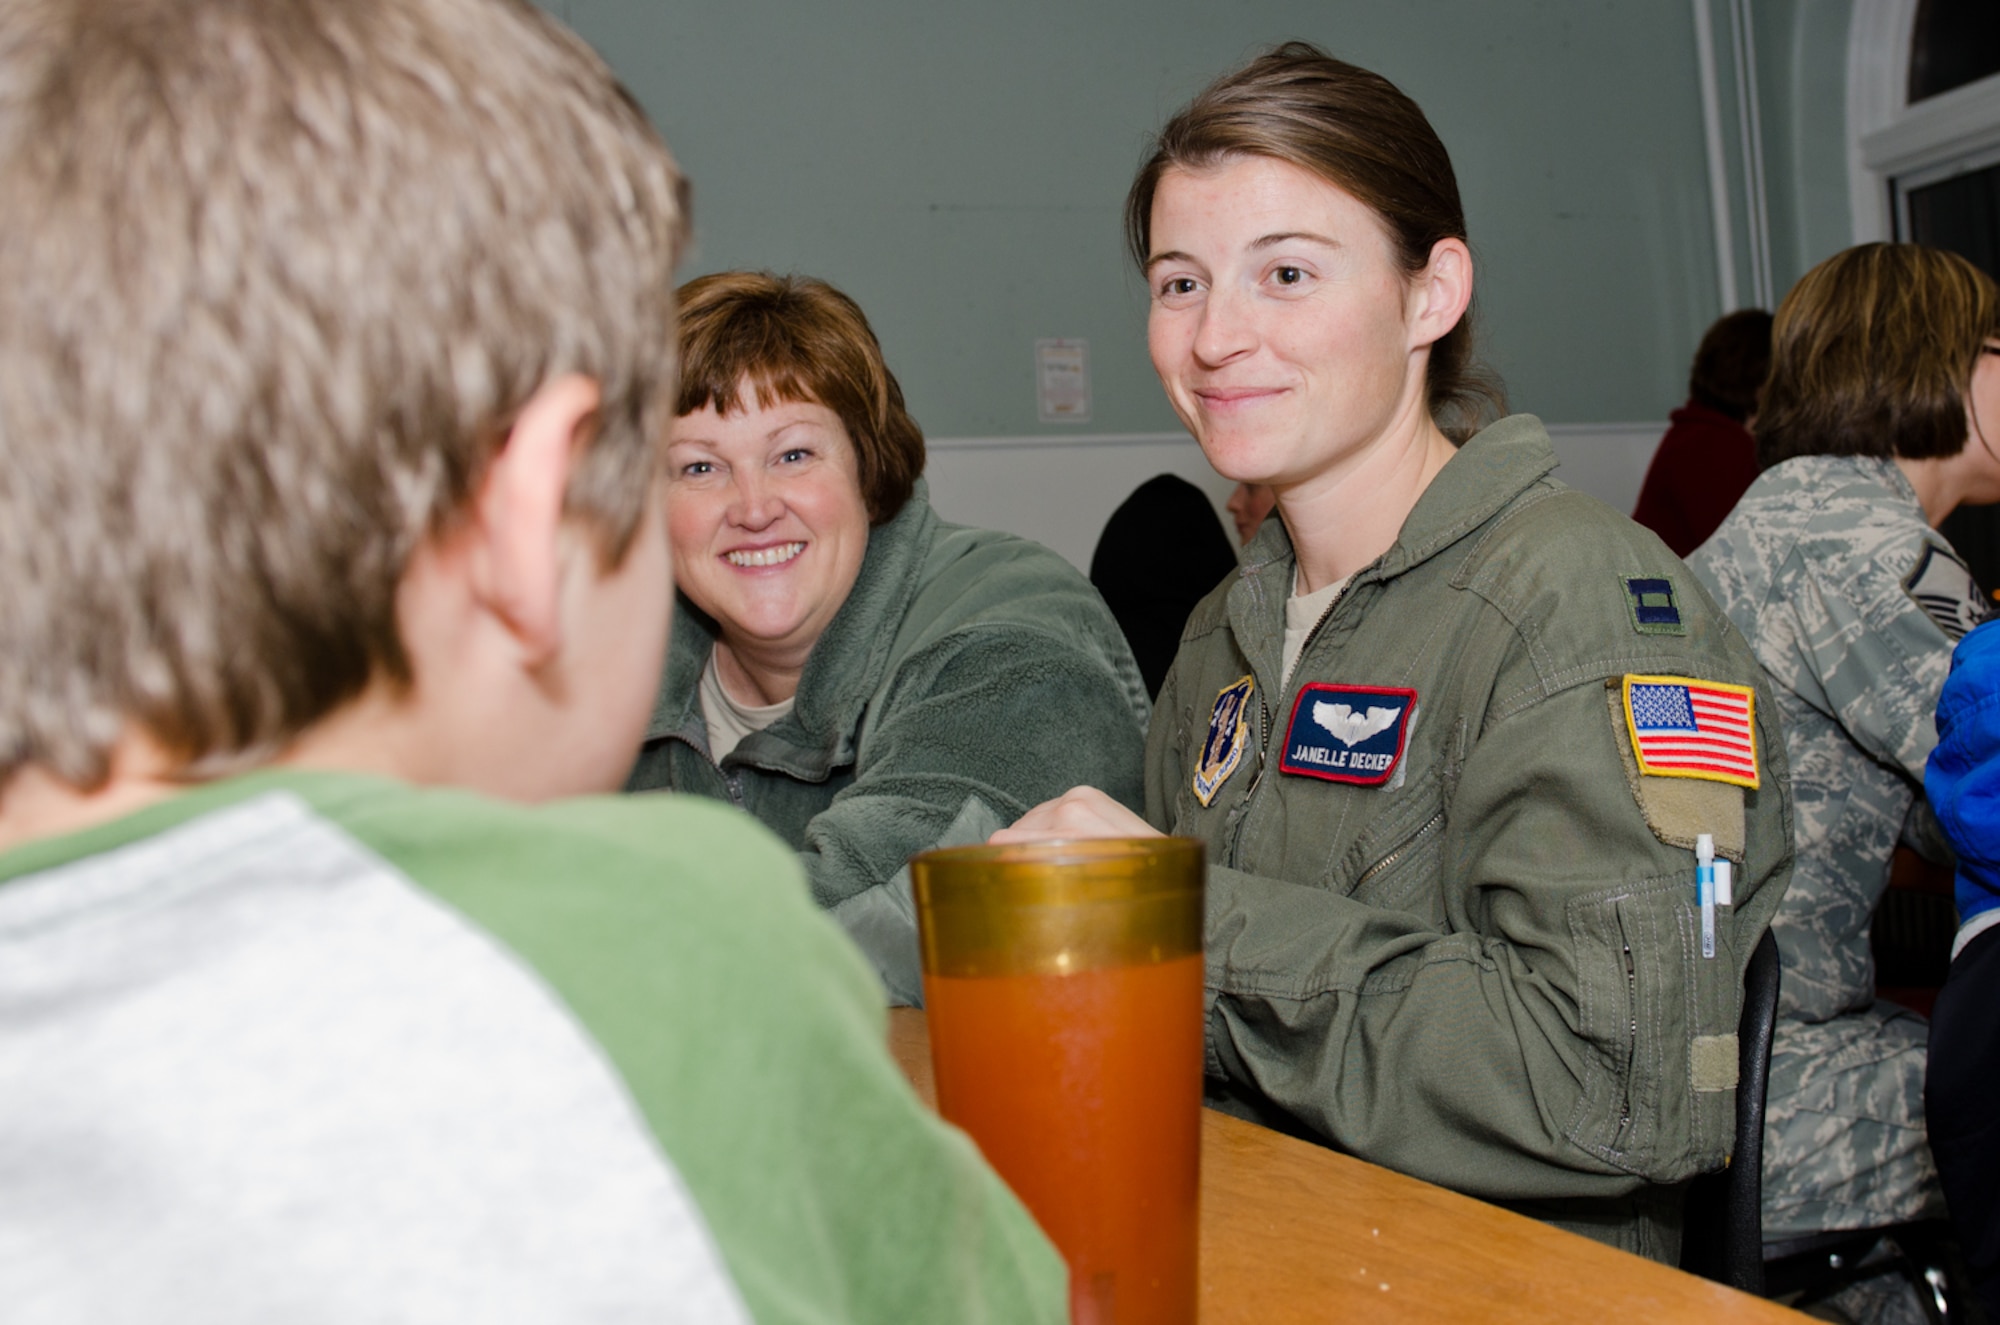 Capt. Janelle Decker (right), 180th Airlift Squadron, and Lt. Col. Kimberly Daniel, 139th Operations Group, talk with a kid from the Noyes Home for Children in St. Joseph, Mo., Dec. 13, 2011. Guardmembers of the 139th Airlift Wing teamed up with local businesses to donate Christmas gifts for the Noyes Home. (Missouri Air National Guard photo by Staff Sgt. Michael Crane)